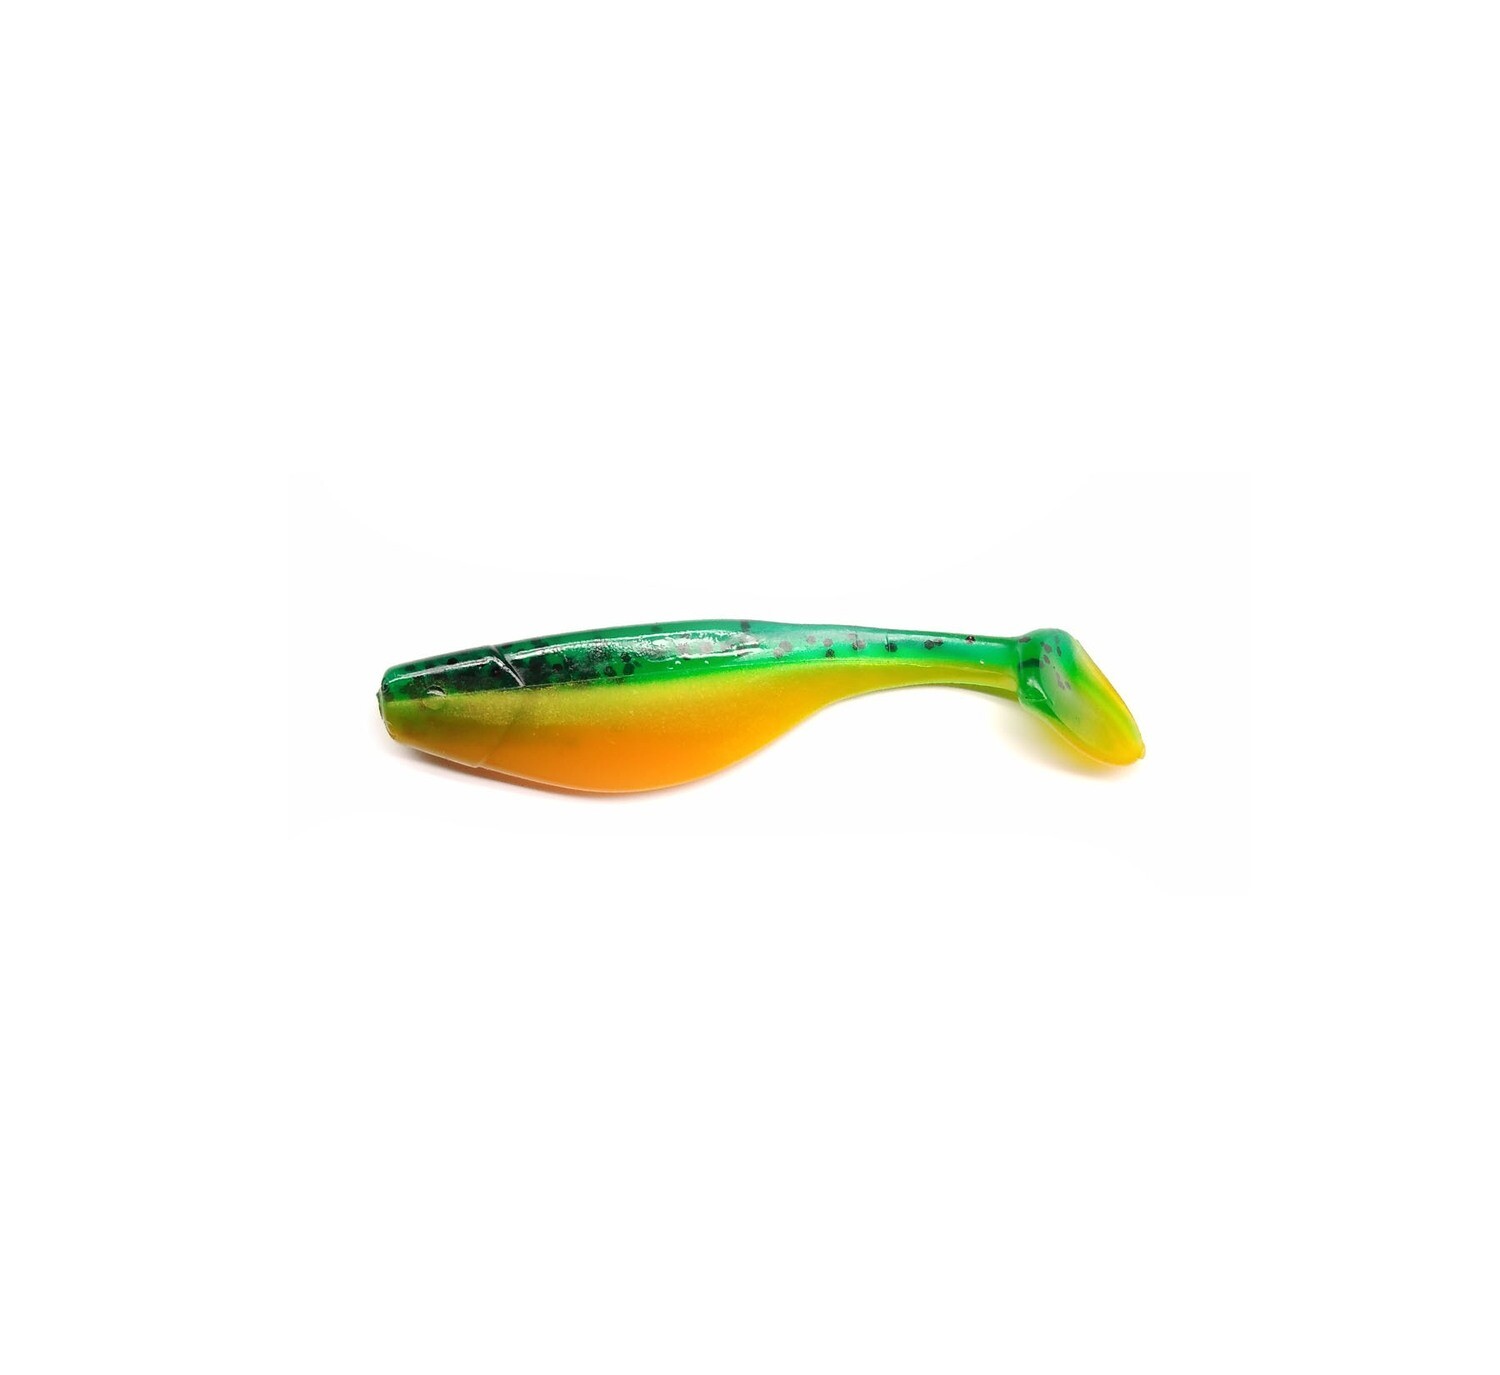 2 Paddle Tail Shad Swimbait – Dolittle and Fishmore – Fishing Lures and Soft  Plastic Bait